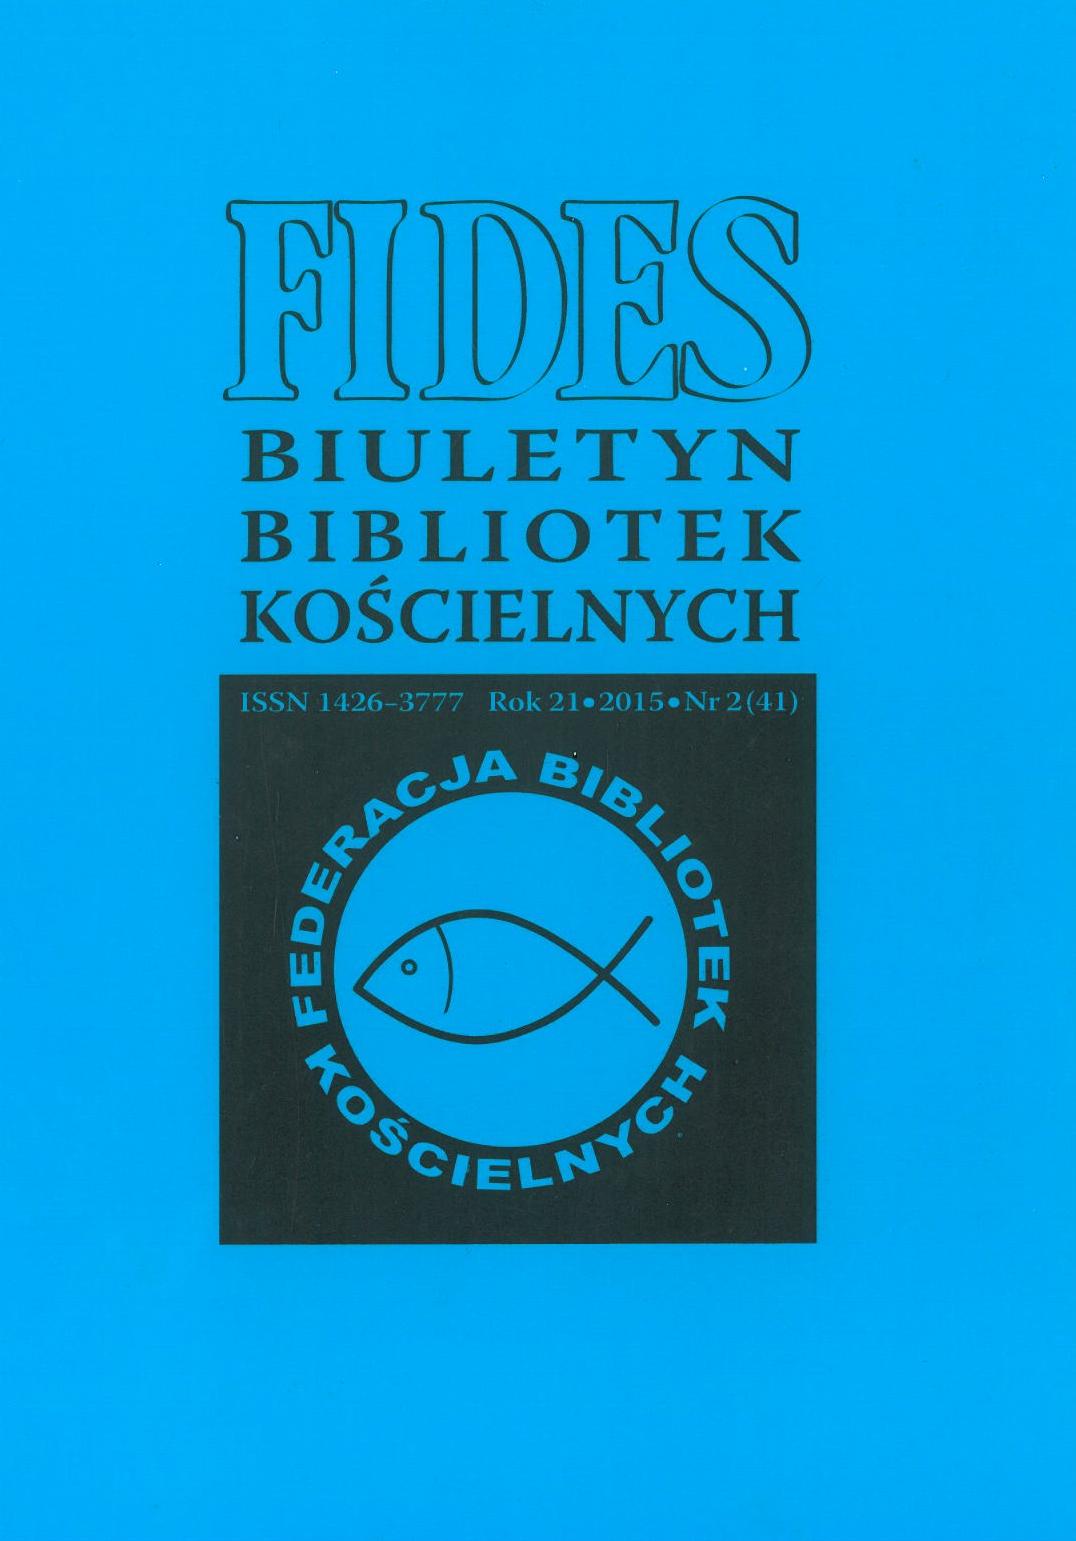 The Catalogue of Bachelor’s Theses about Church Libraries in Poland for the Years 1962-2012 Cover Image